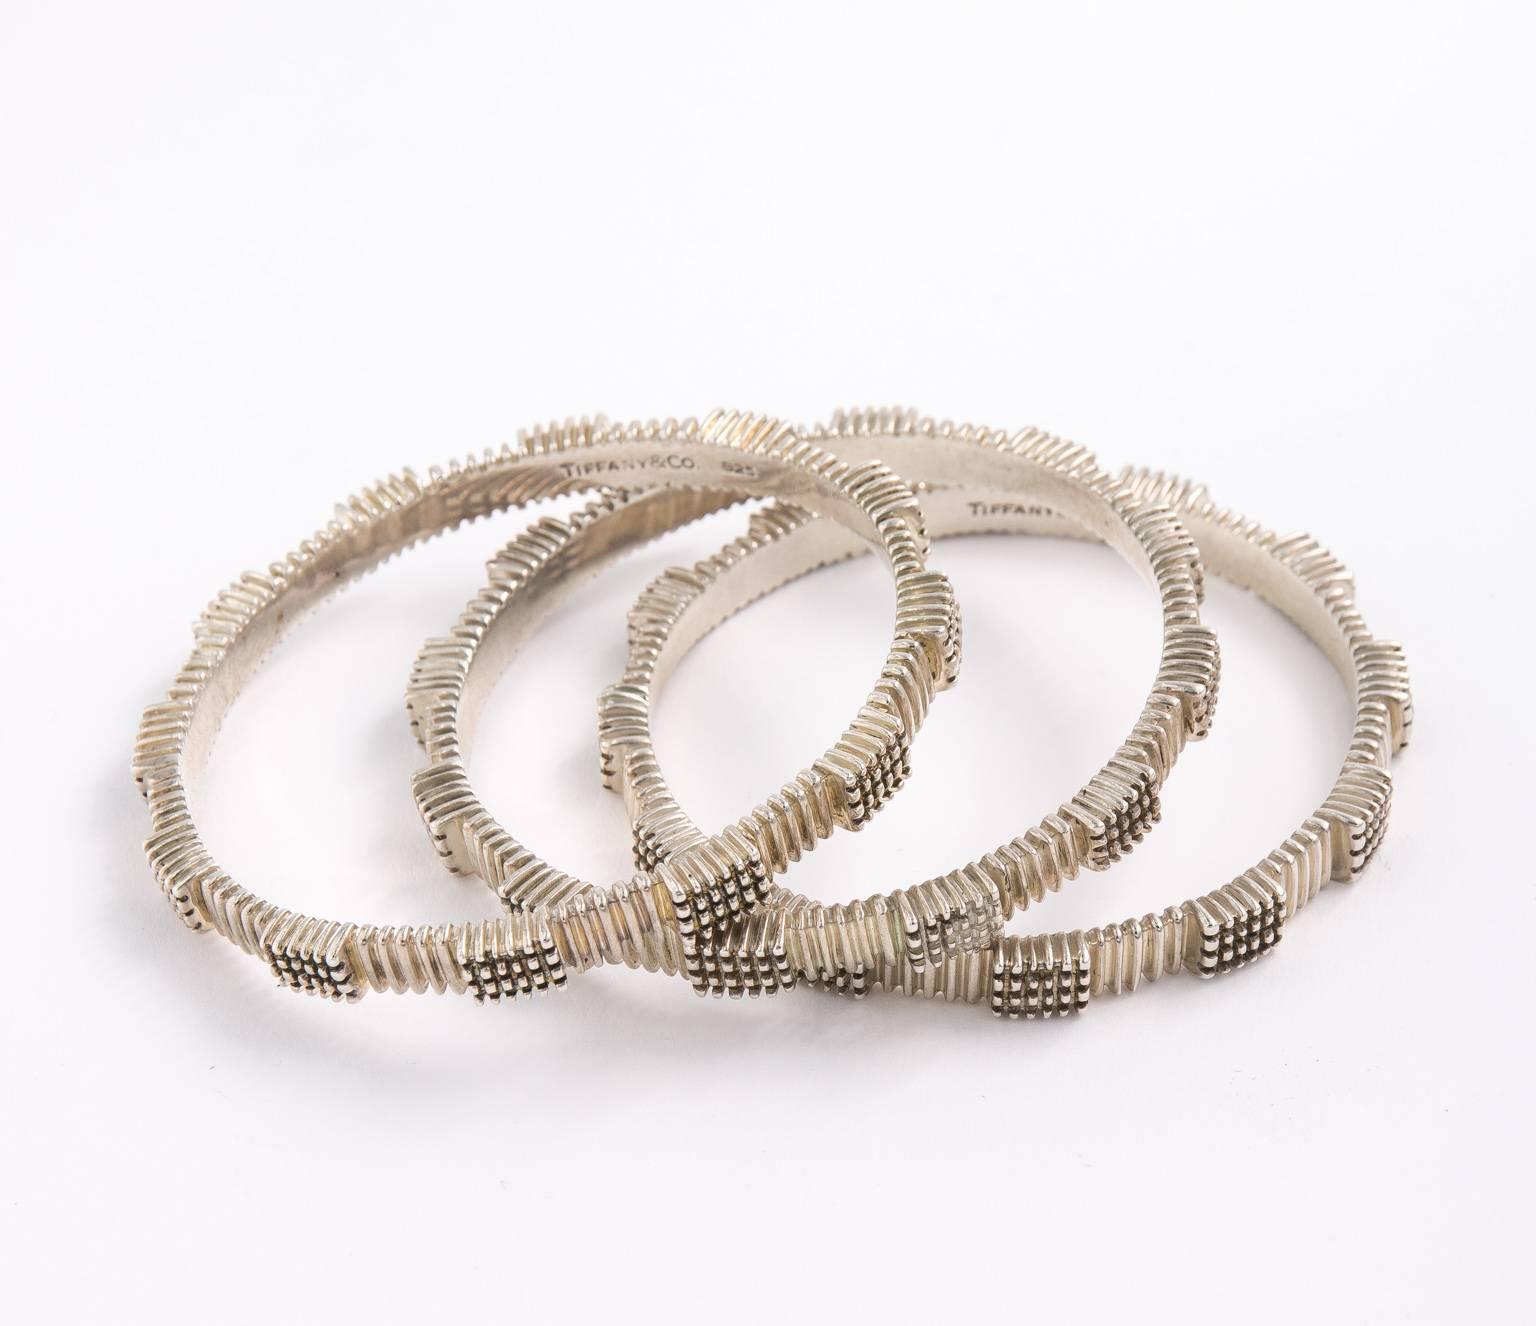 Set of three Modernist style, sterling silver Tiffany bangles ( no longer made). Sterling Silver, 925 Made in Italy.
PERIOD:1960-1980
STYLES:Mid-Century Modern
MATERIALS:Silver
